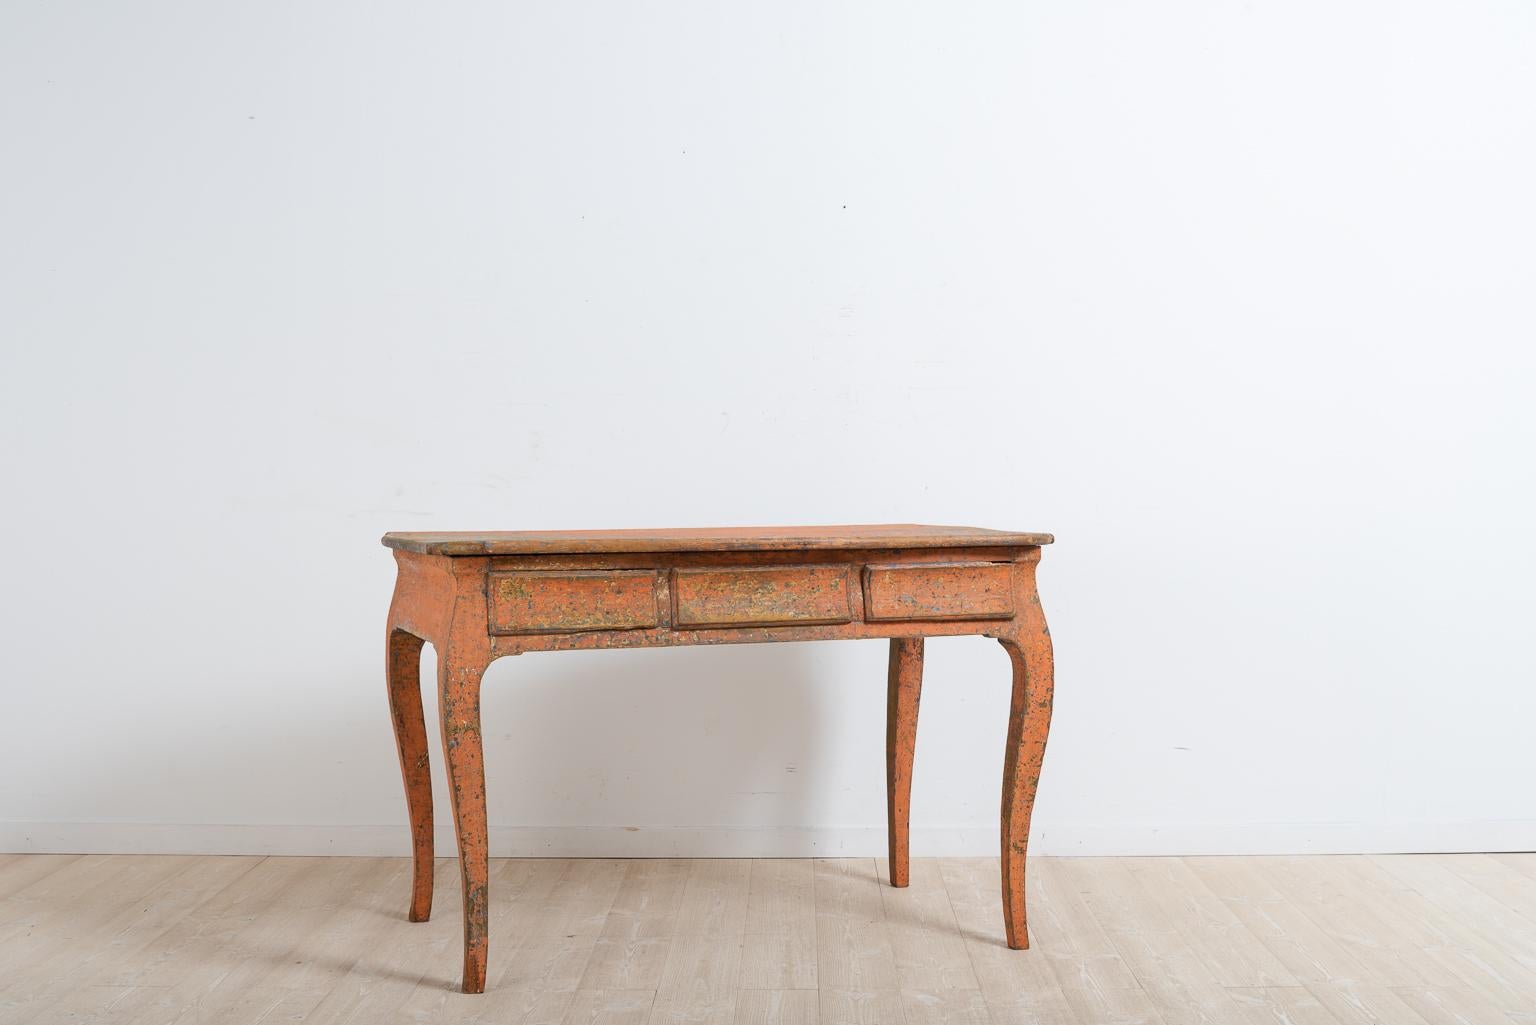 Hand-Crafted Late 18th Century Swedish Rococo Desk with Original Paint